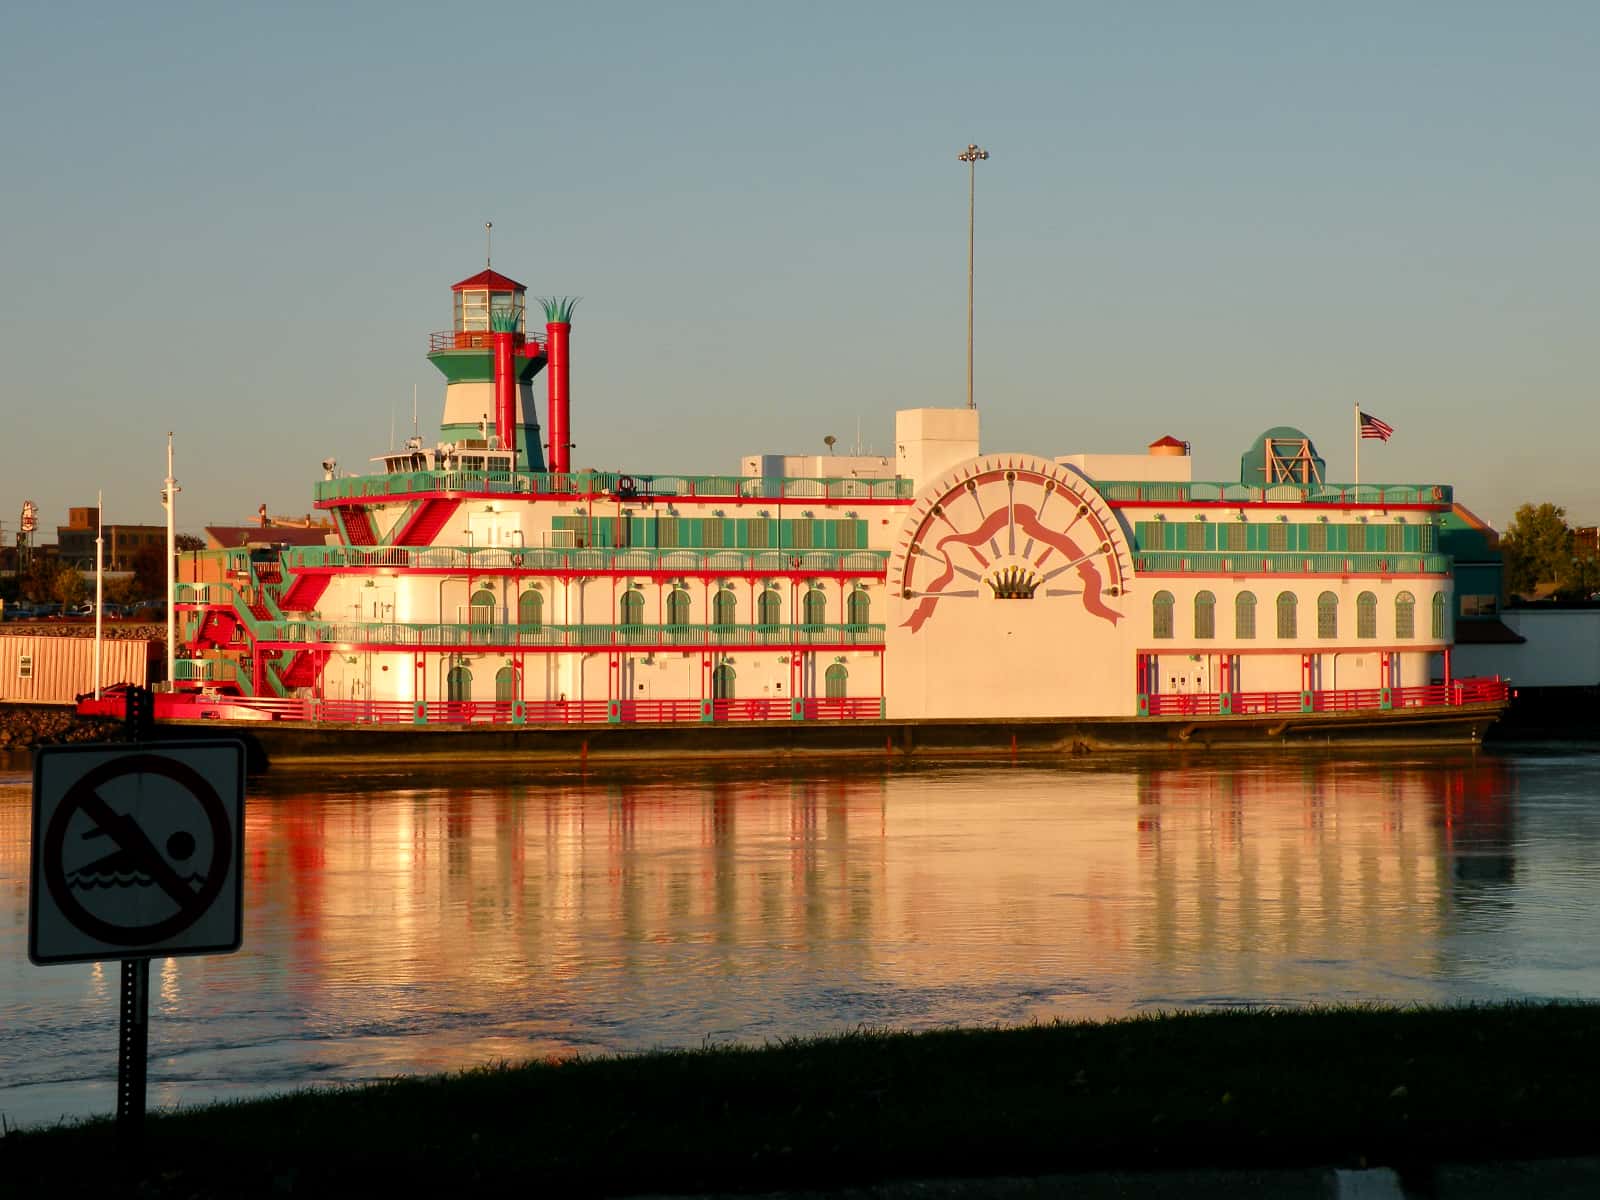 Red white and green paddle steamer in evening sun